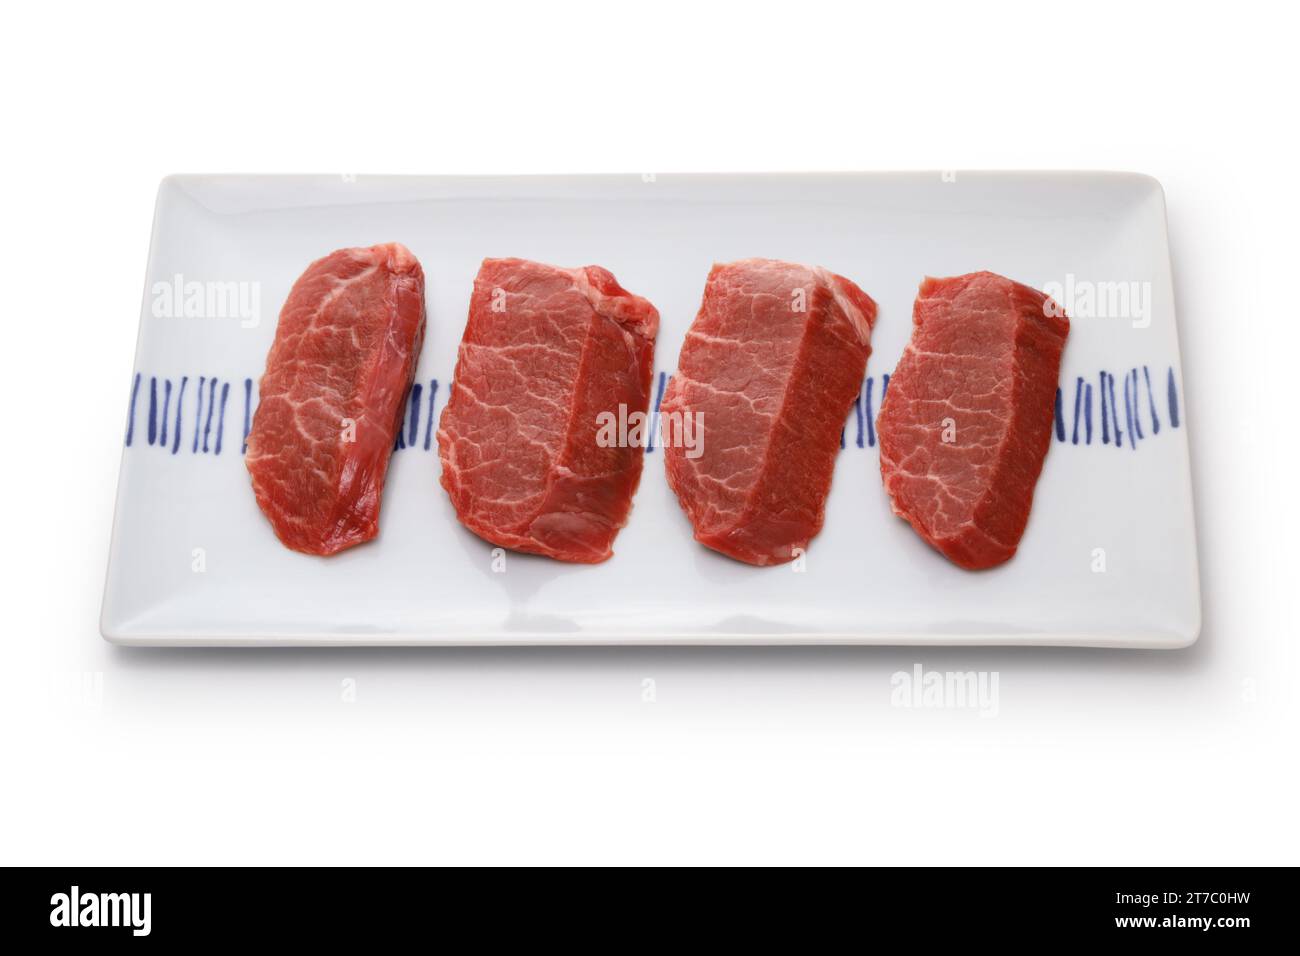 A rare cut of beef called 'necktie' in Japan. Japanese Yakiniku(grilled meat) ingredients. Stock Photo